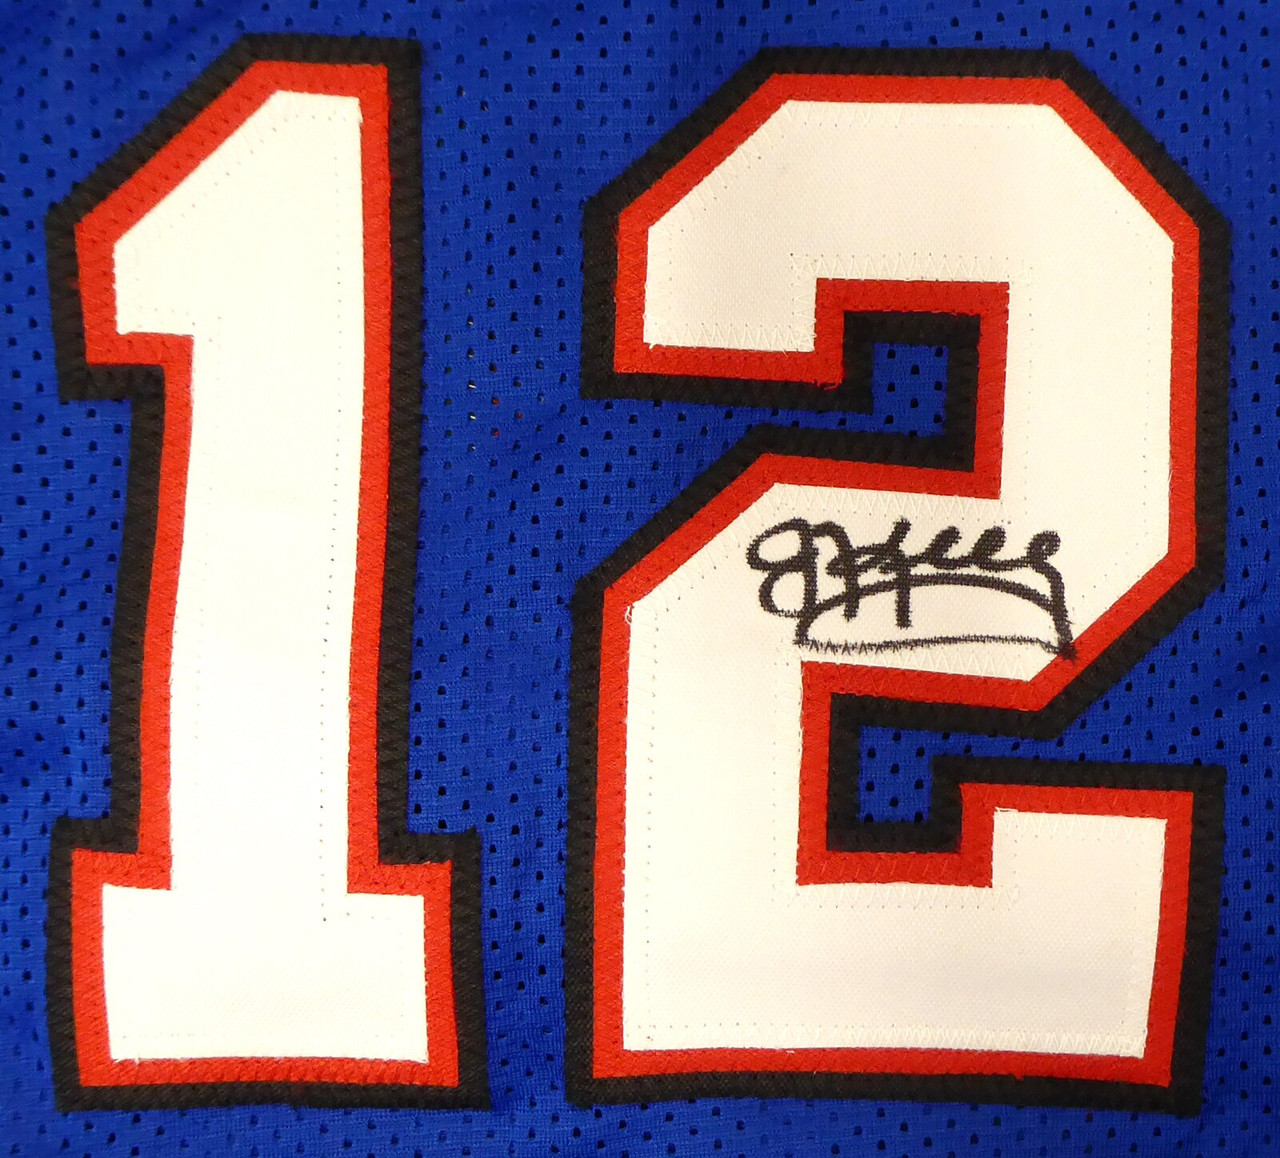 Andre Reed Autographed and Framed Blue Bills Jersey